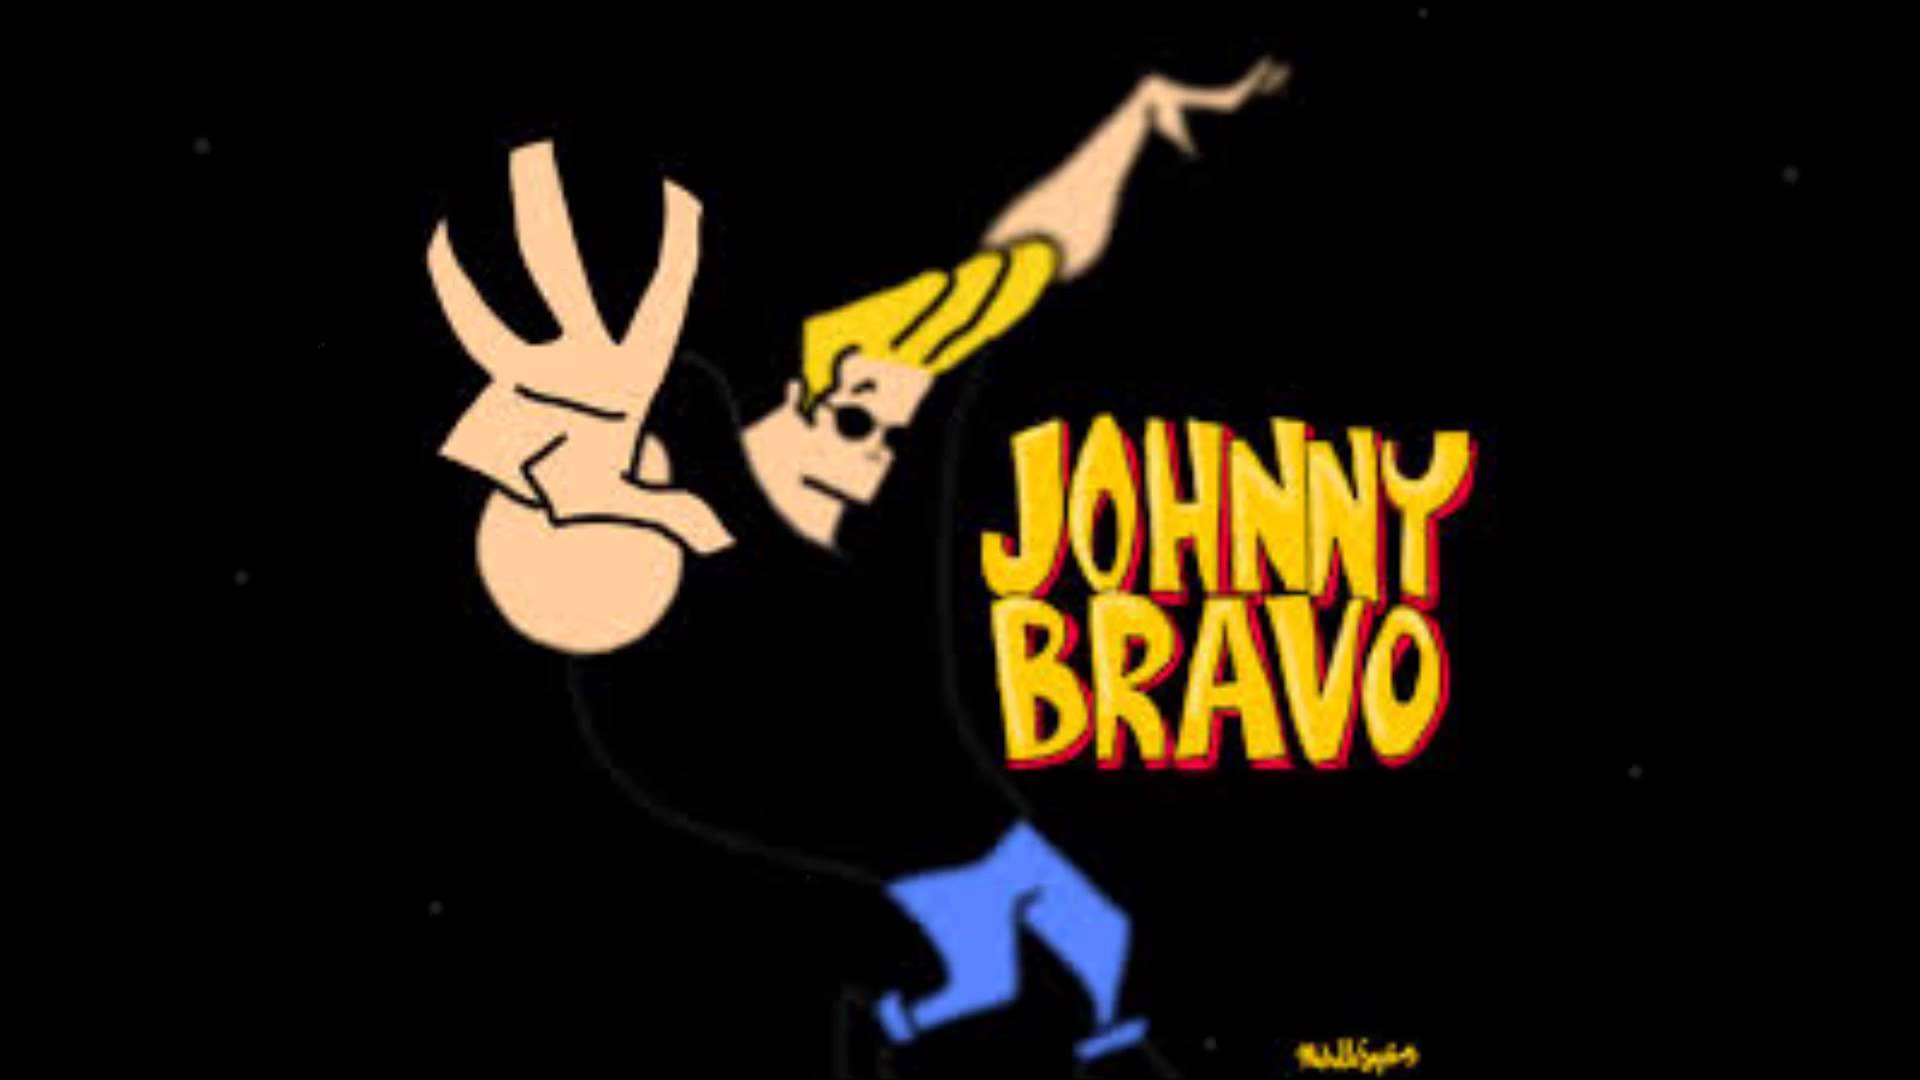 Johnny Bravo Wallpaper, image collections of wallpaper